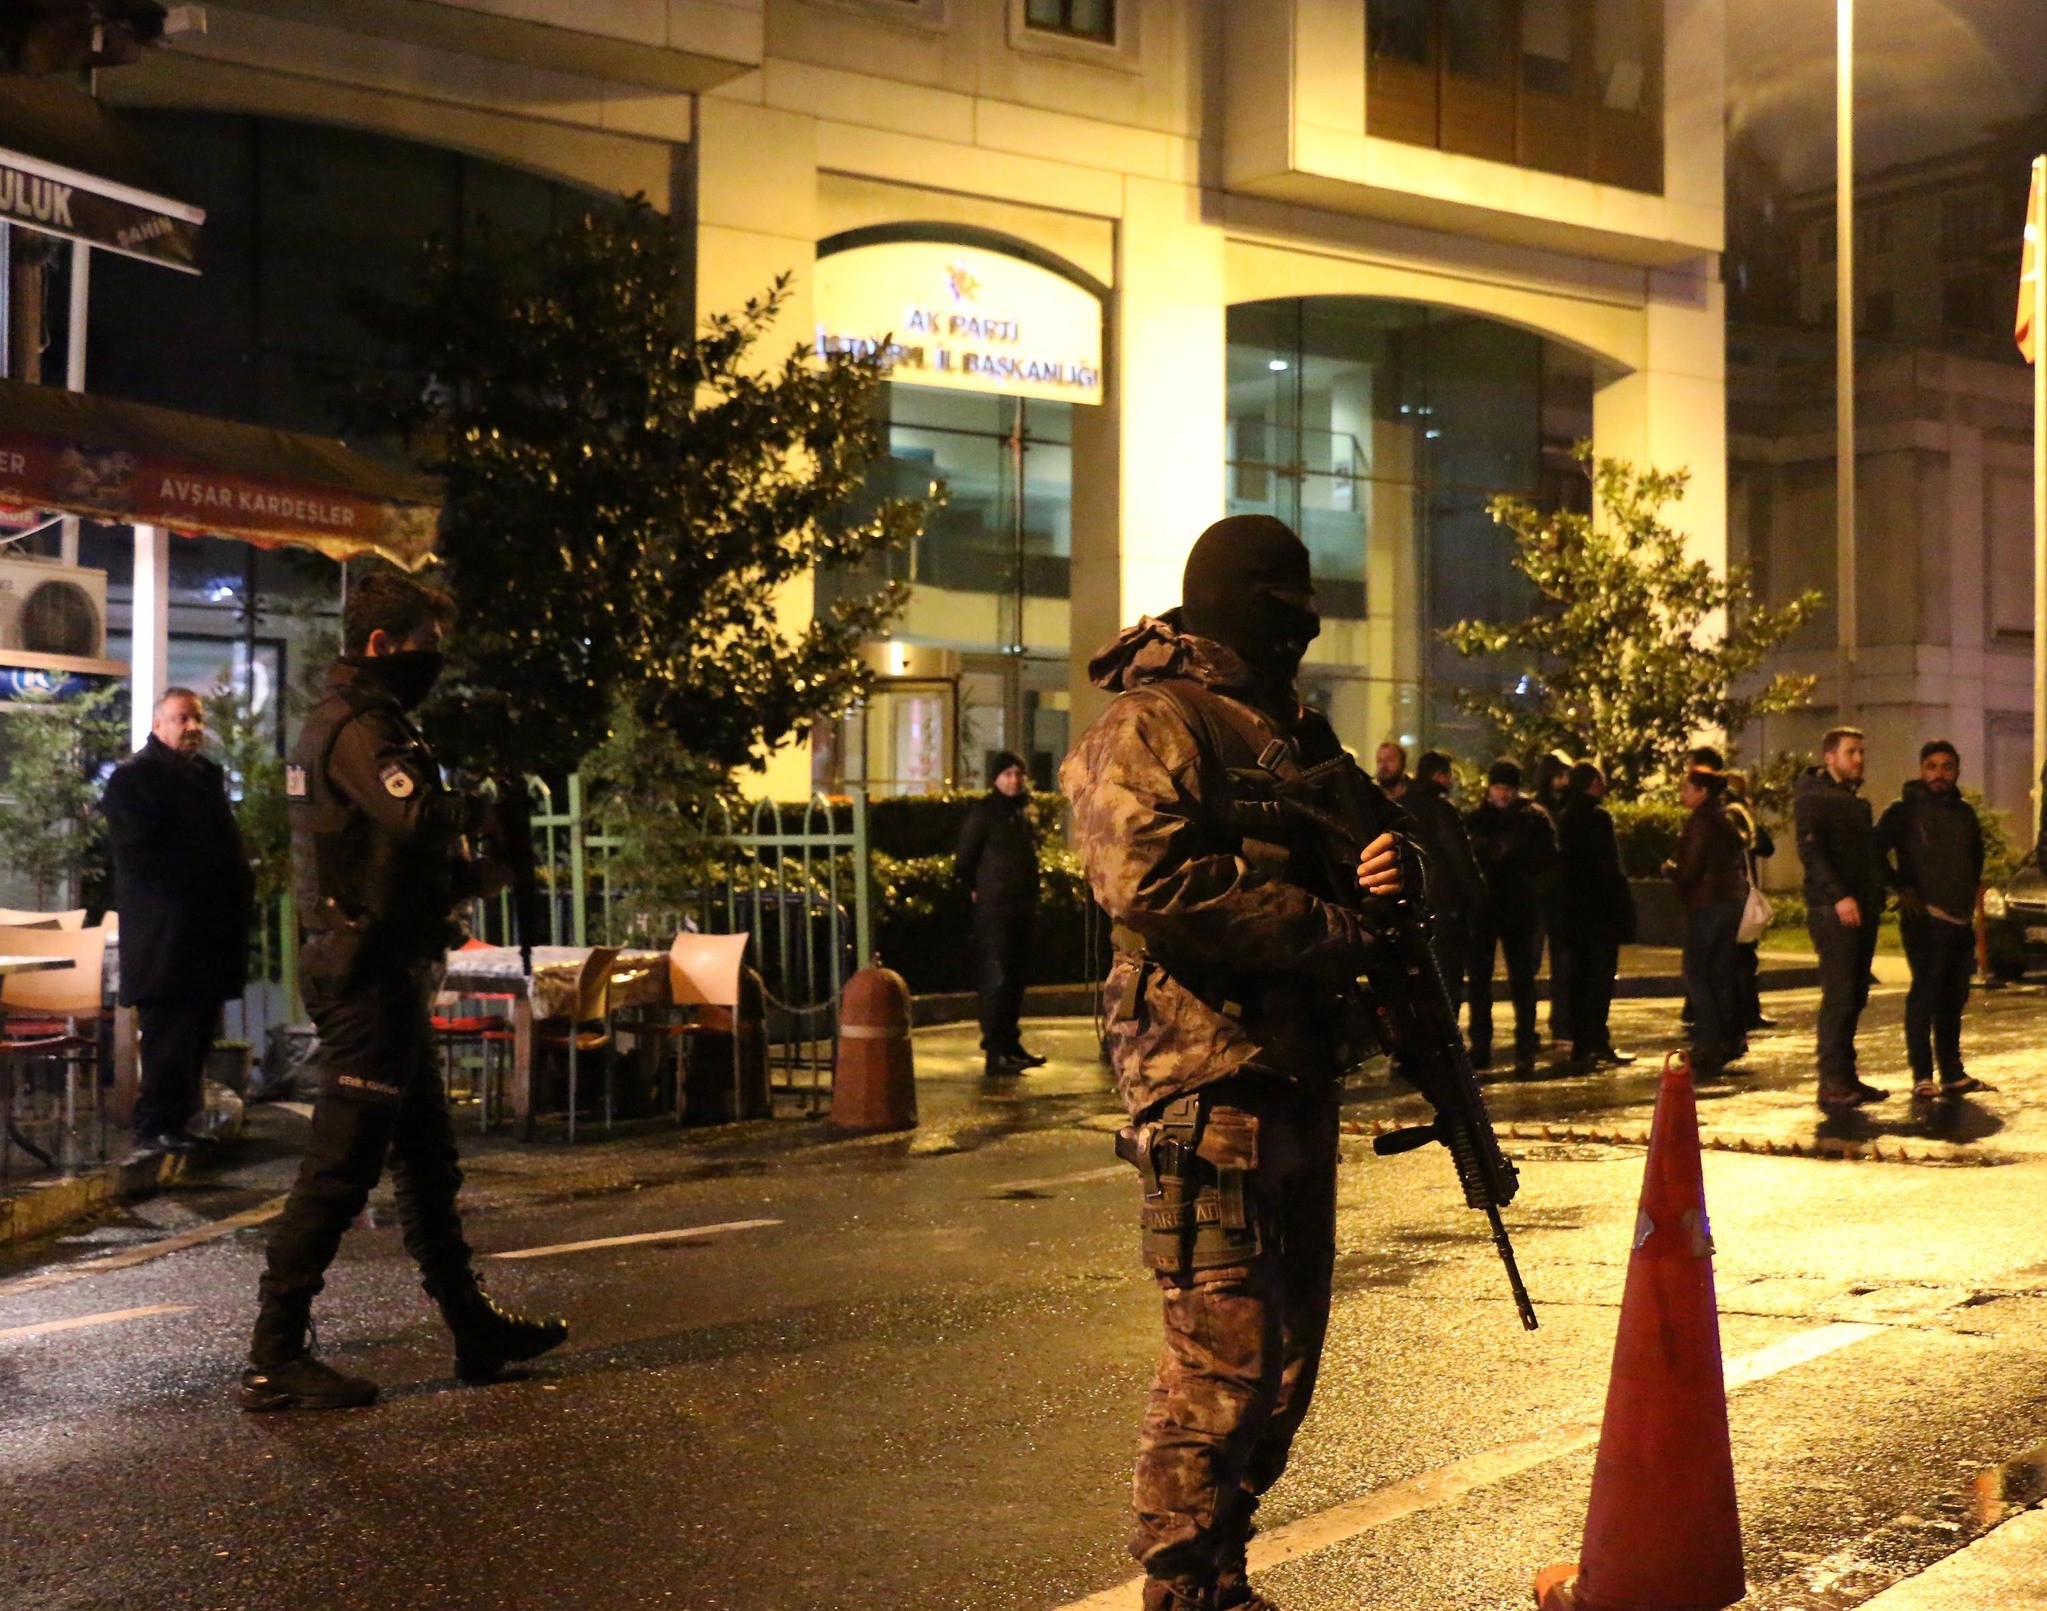 Turkish security forces wait outside the Istanbul headquarters of AK Party in Su00fctlu00fcce, Istanbul on 20.01.2017. (DHA Photo)